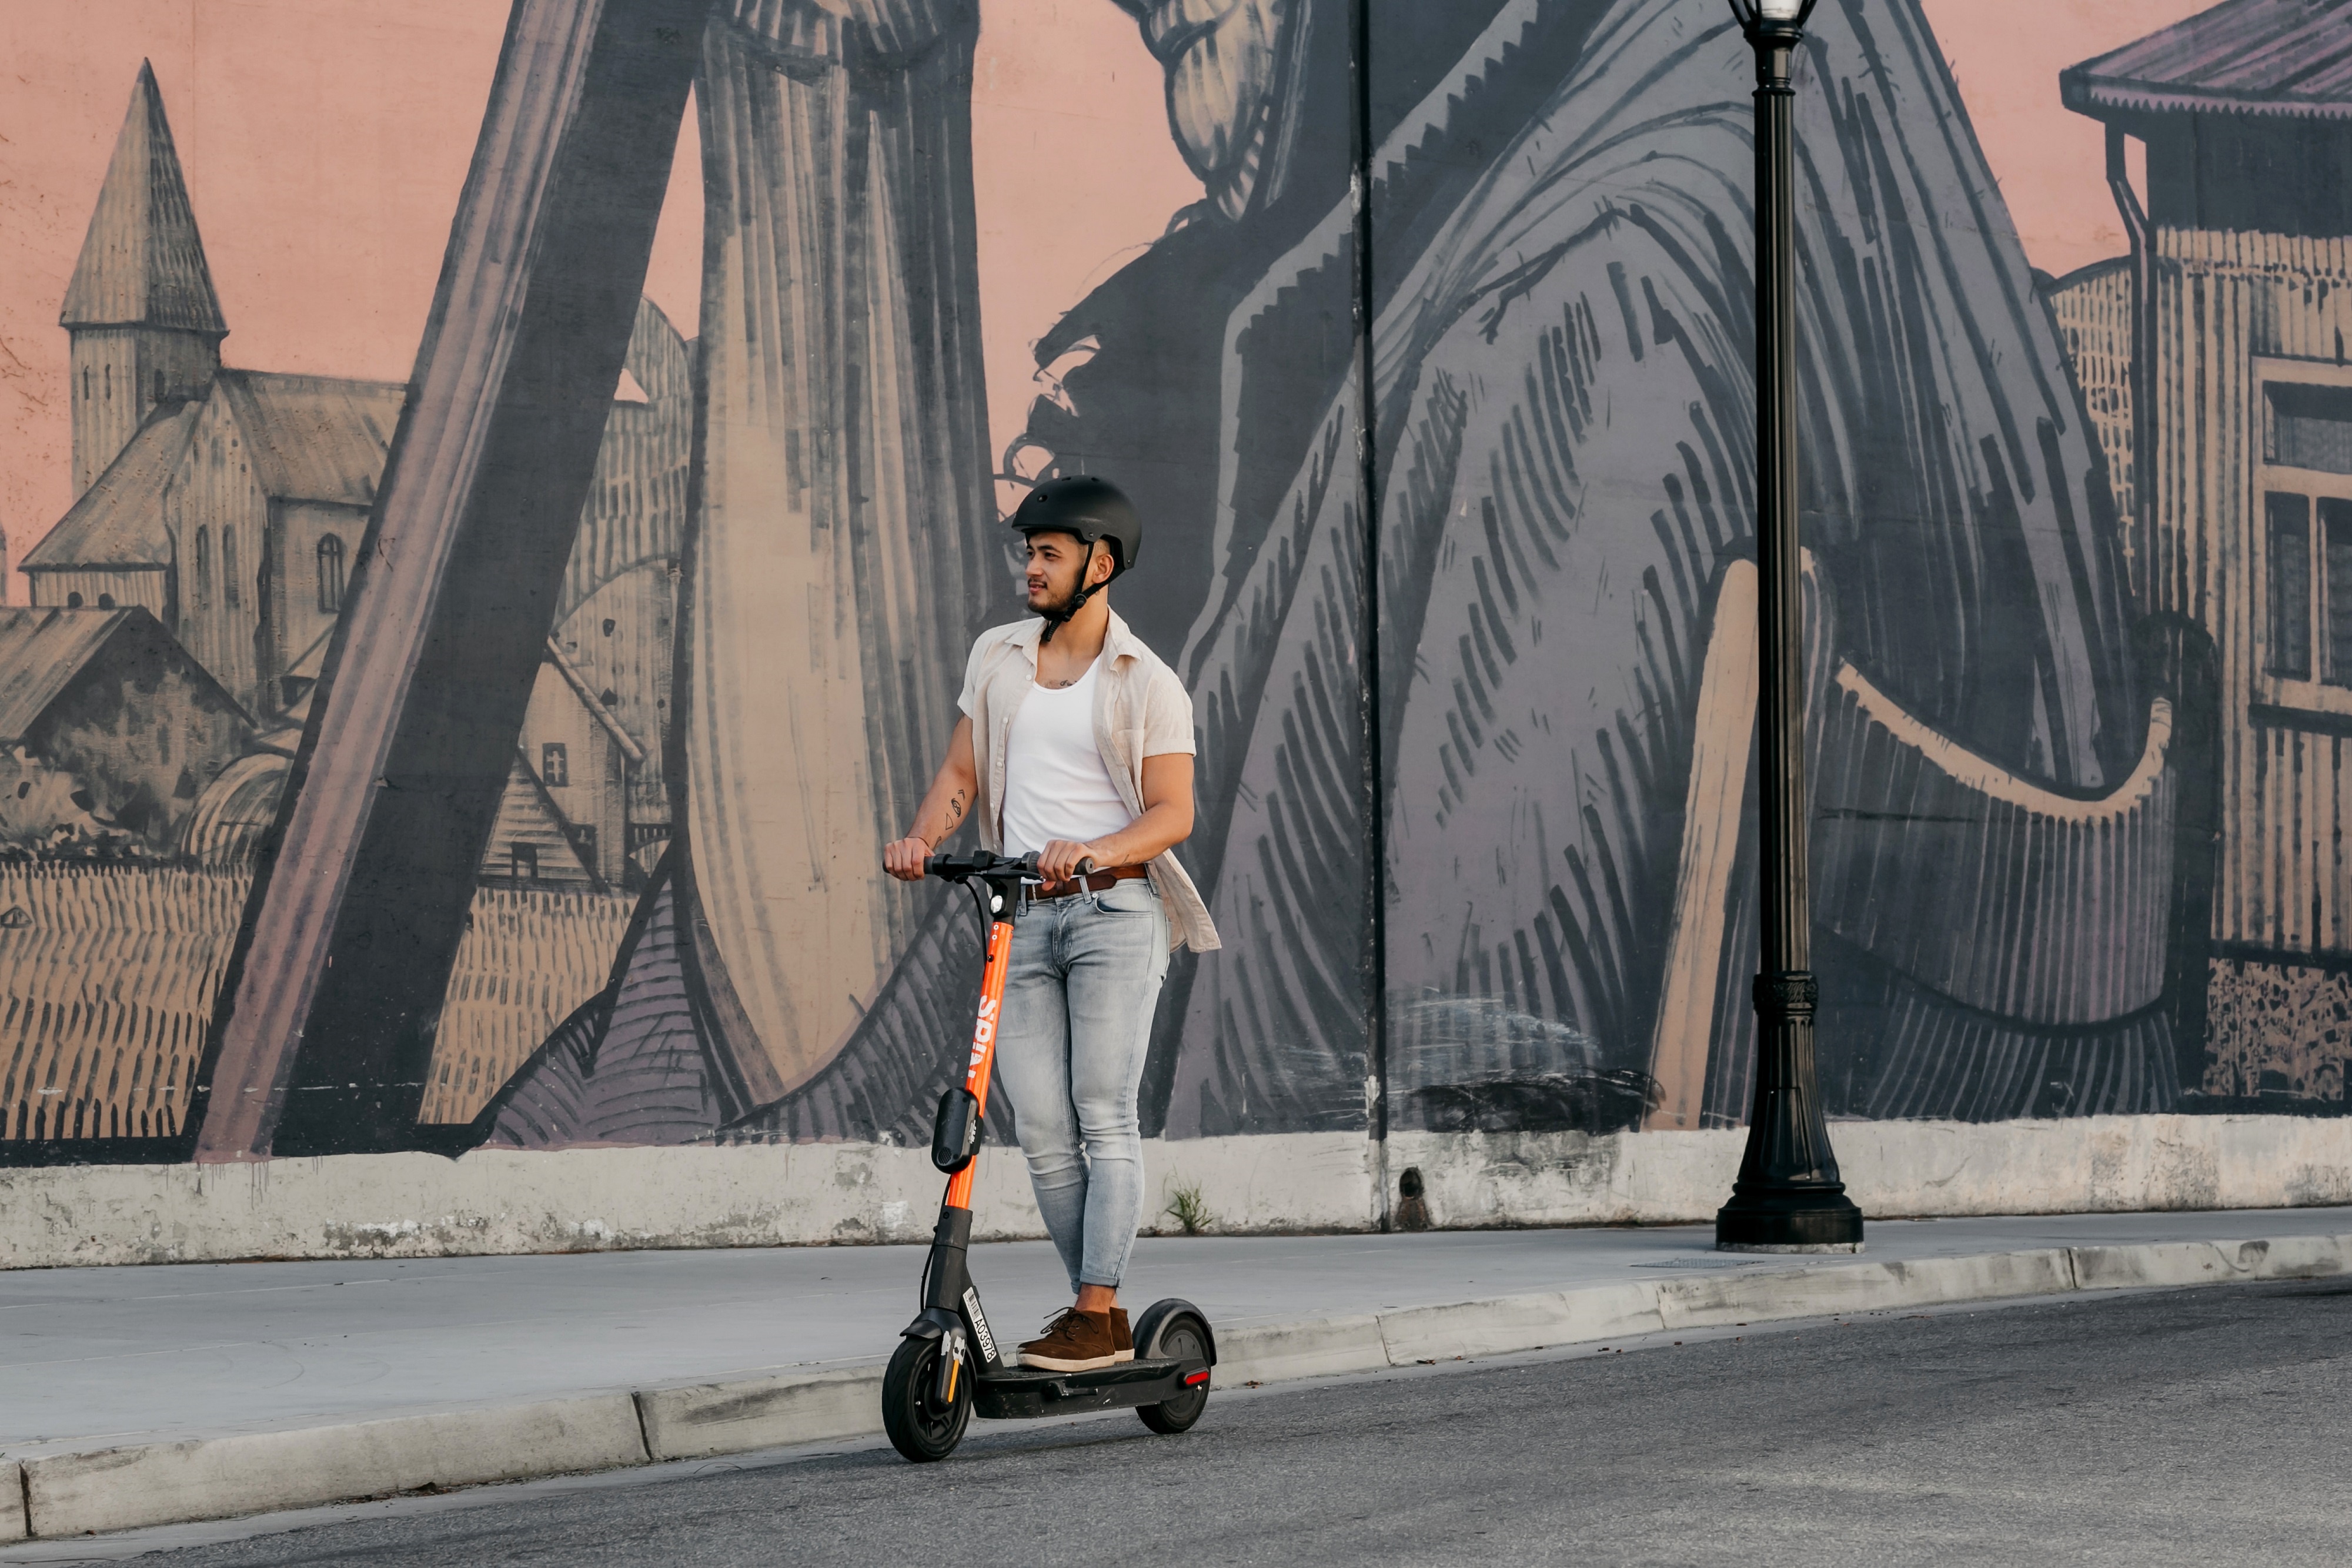 Spin plans to bring e-scooters to Europe (Source: Spin)